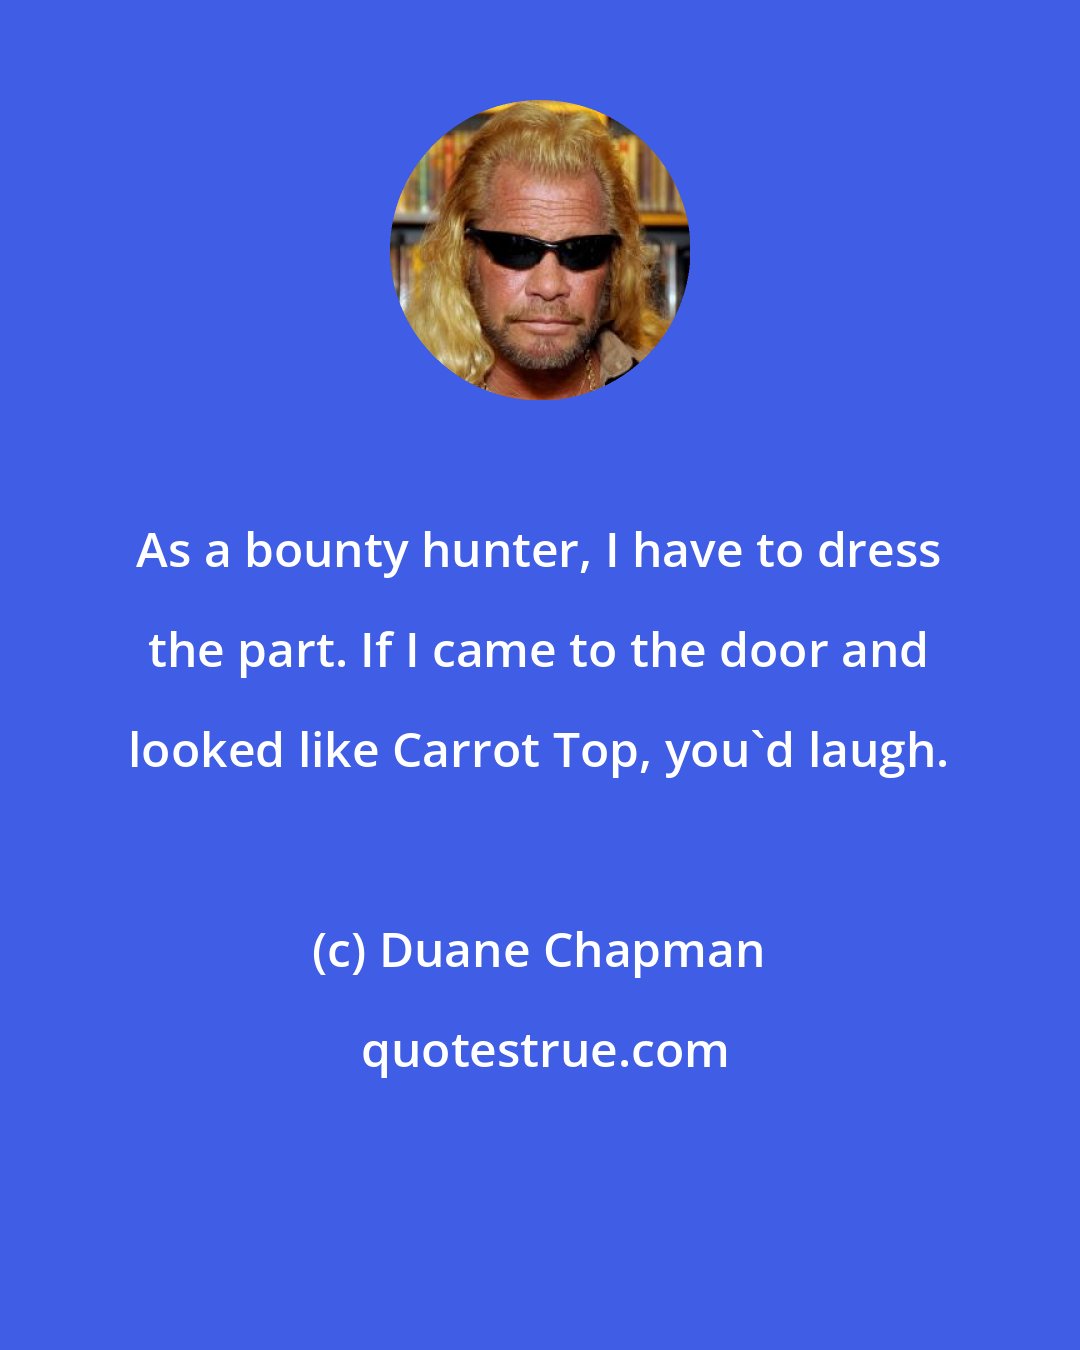 Duane Chapman: As a bounty hunter, I have to dress the part. If I came to the door and looked like Carrot Top, you'd laugh.